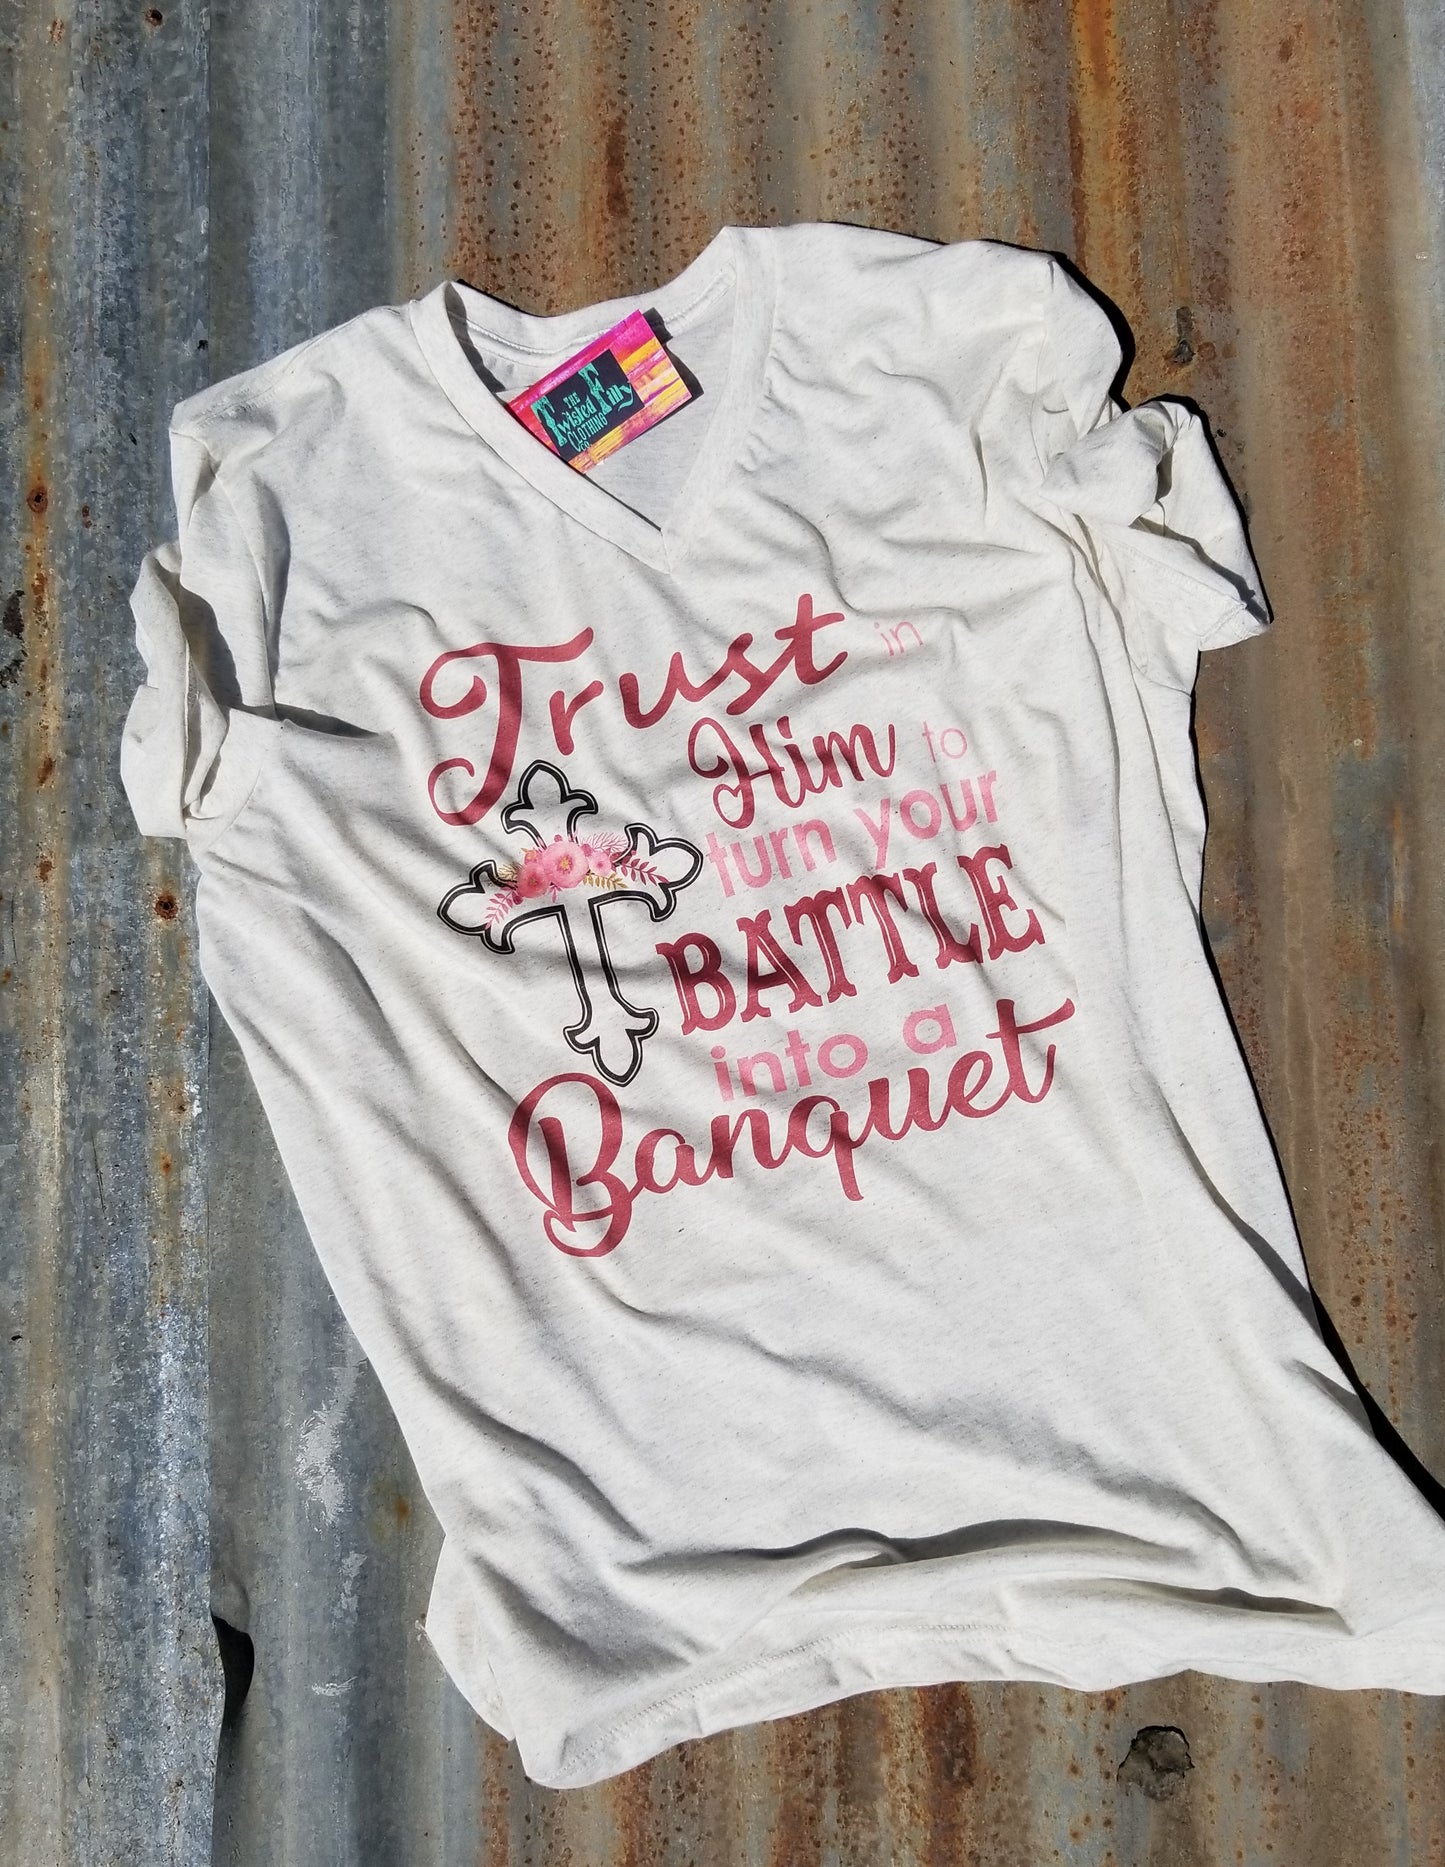 Trust In Him To Turn Your Battle Into a Banquet - S/S Adult Crew Neck Tee - Oatmeal